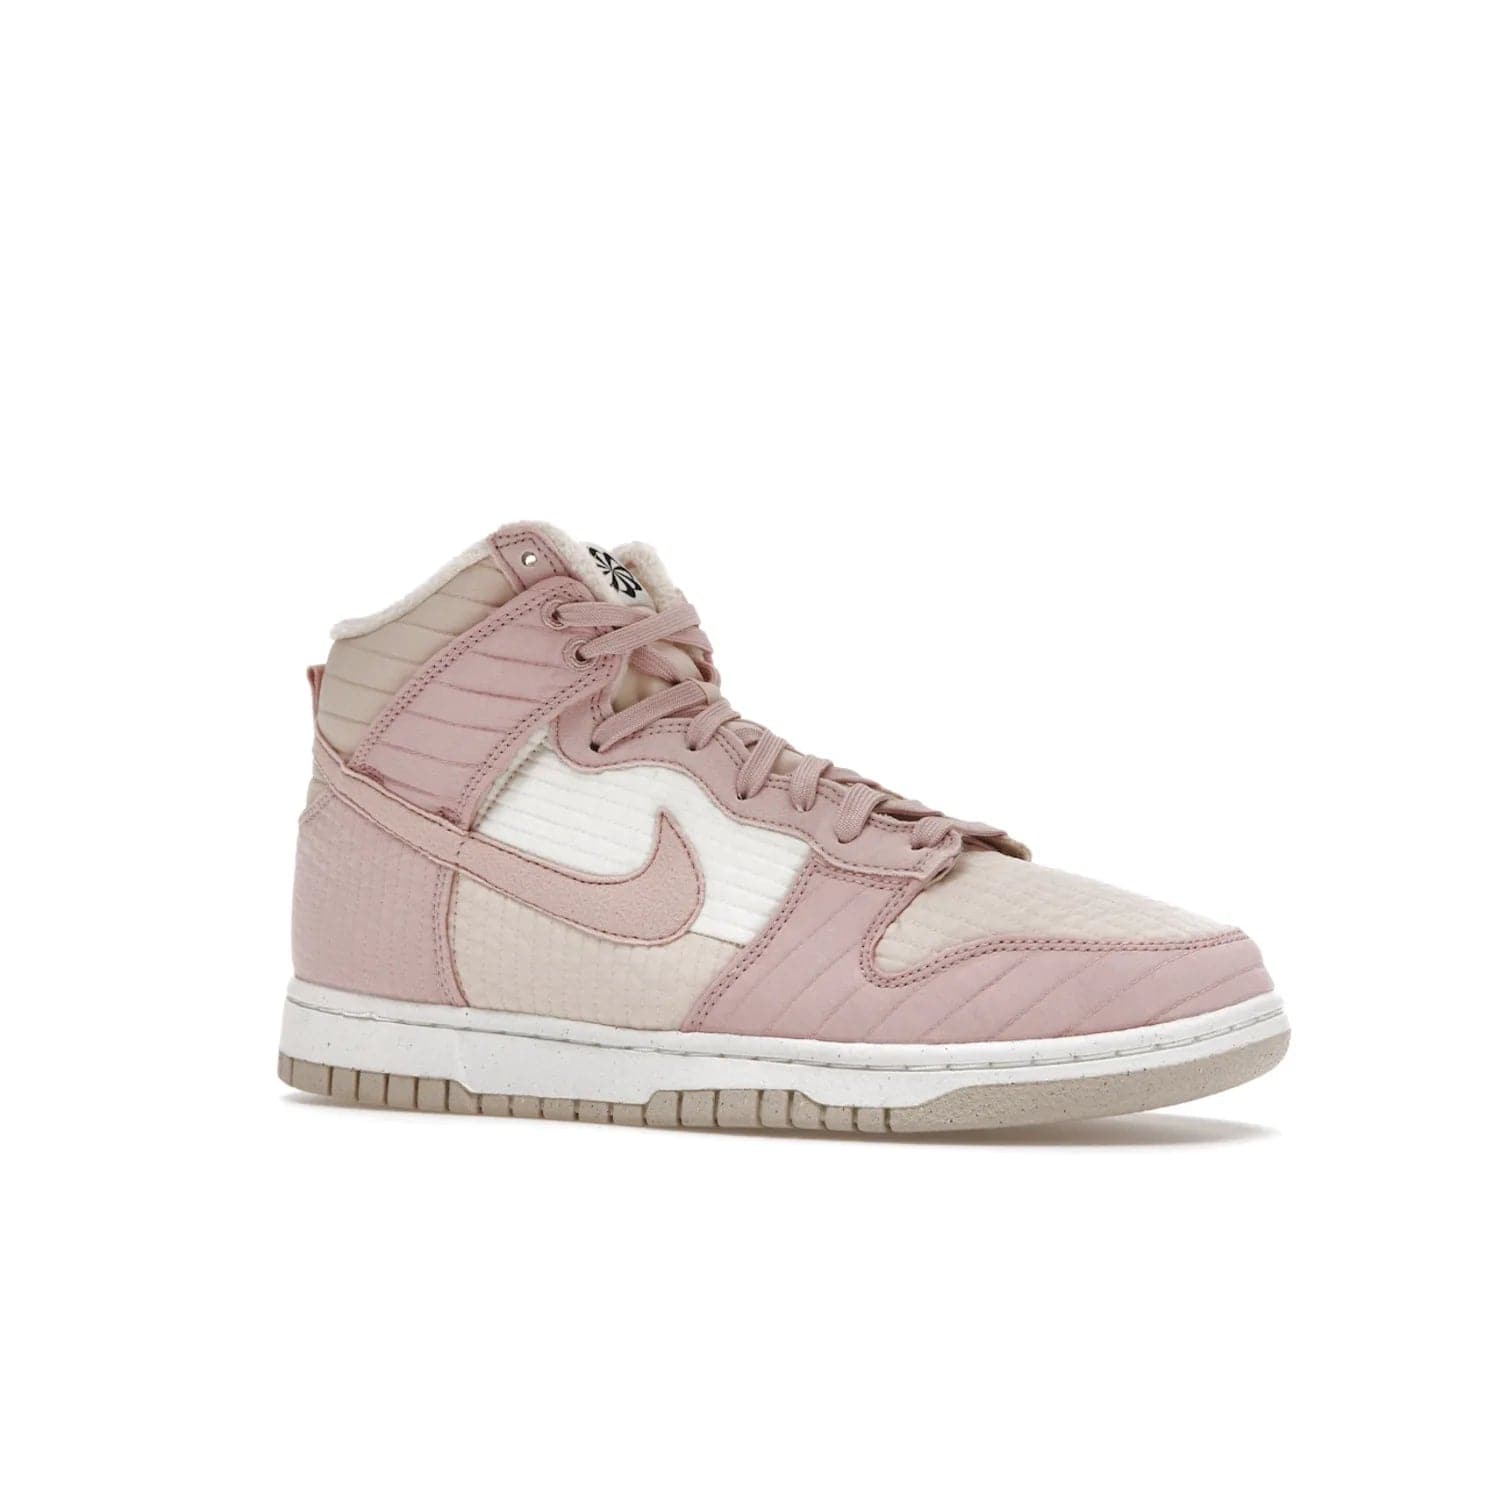 Nike Dunk High LX Next Nature Pink Oxford (Women's) - Image 4 - Only at www.BallersClubKickz.com - Cozy up in the Nike Dunk High LX Next Nature Pink Oxford for Women. Quilted upper, white midsole, soft fleece interior provide warmth and comfort for cold winter nights.